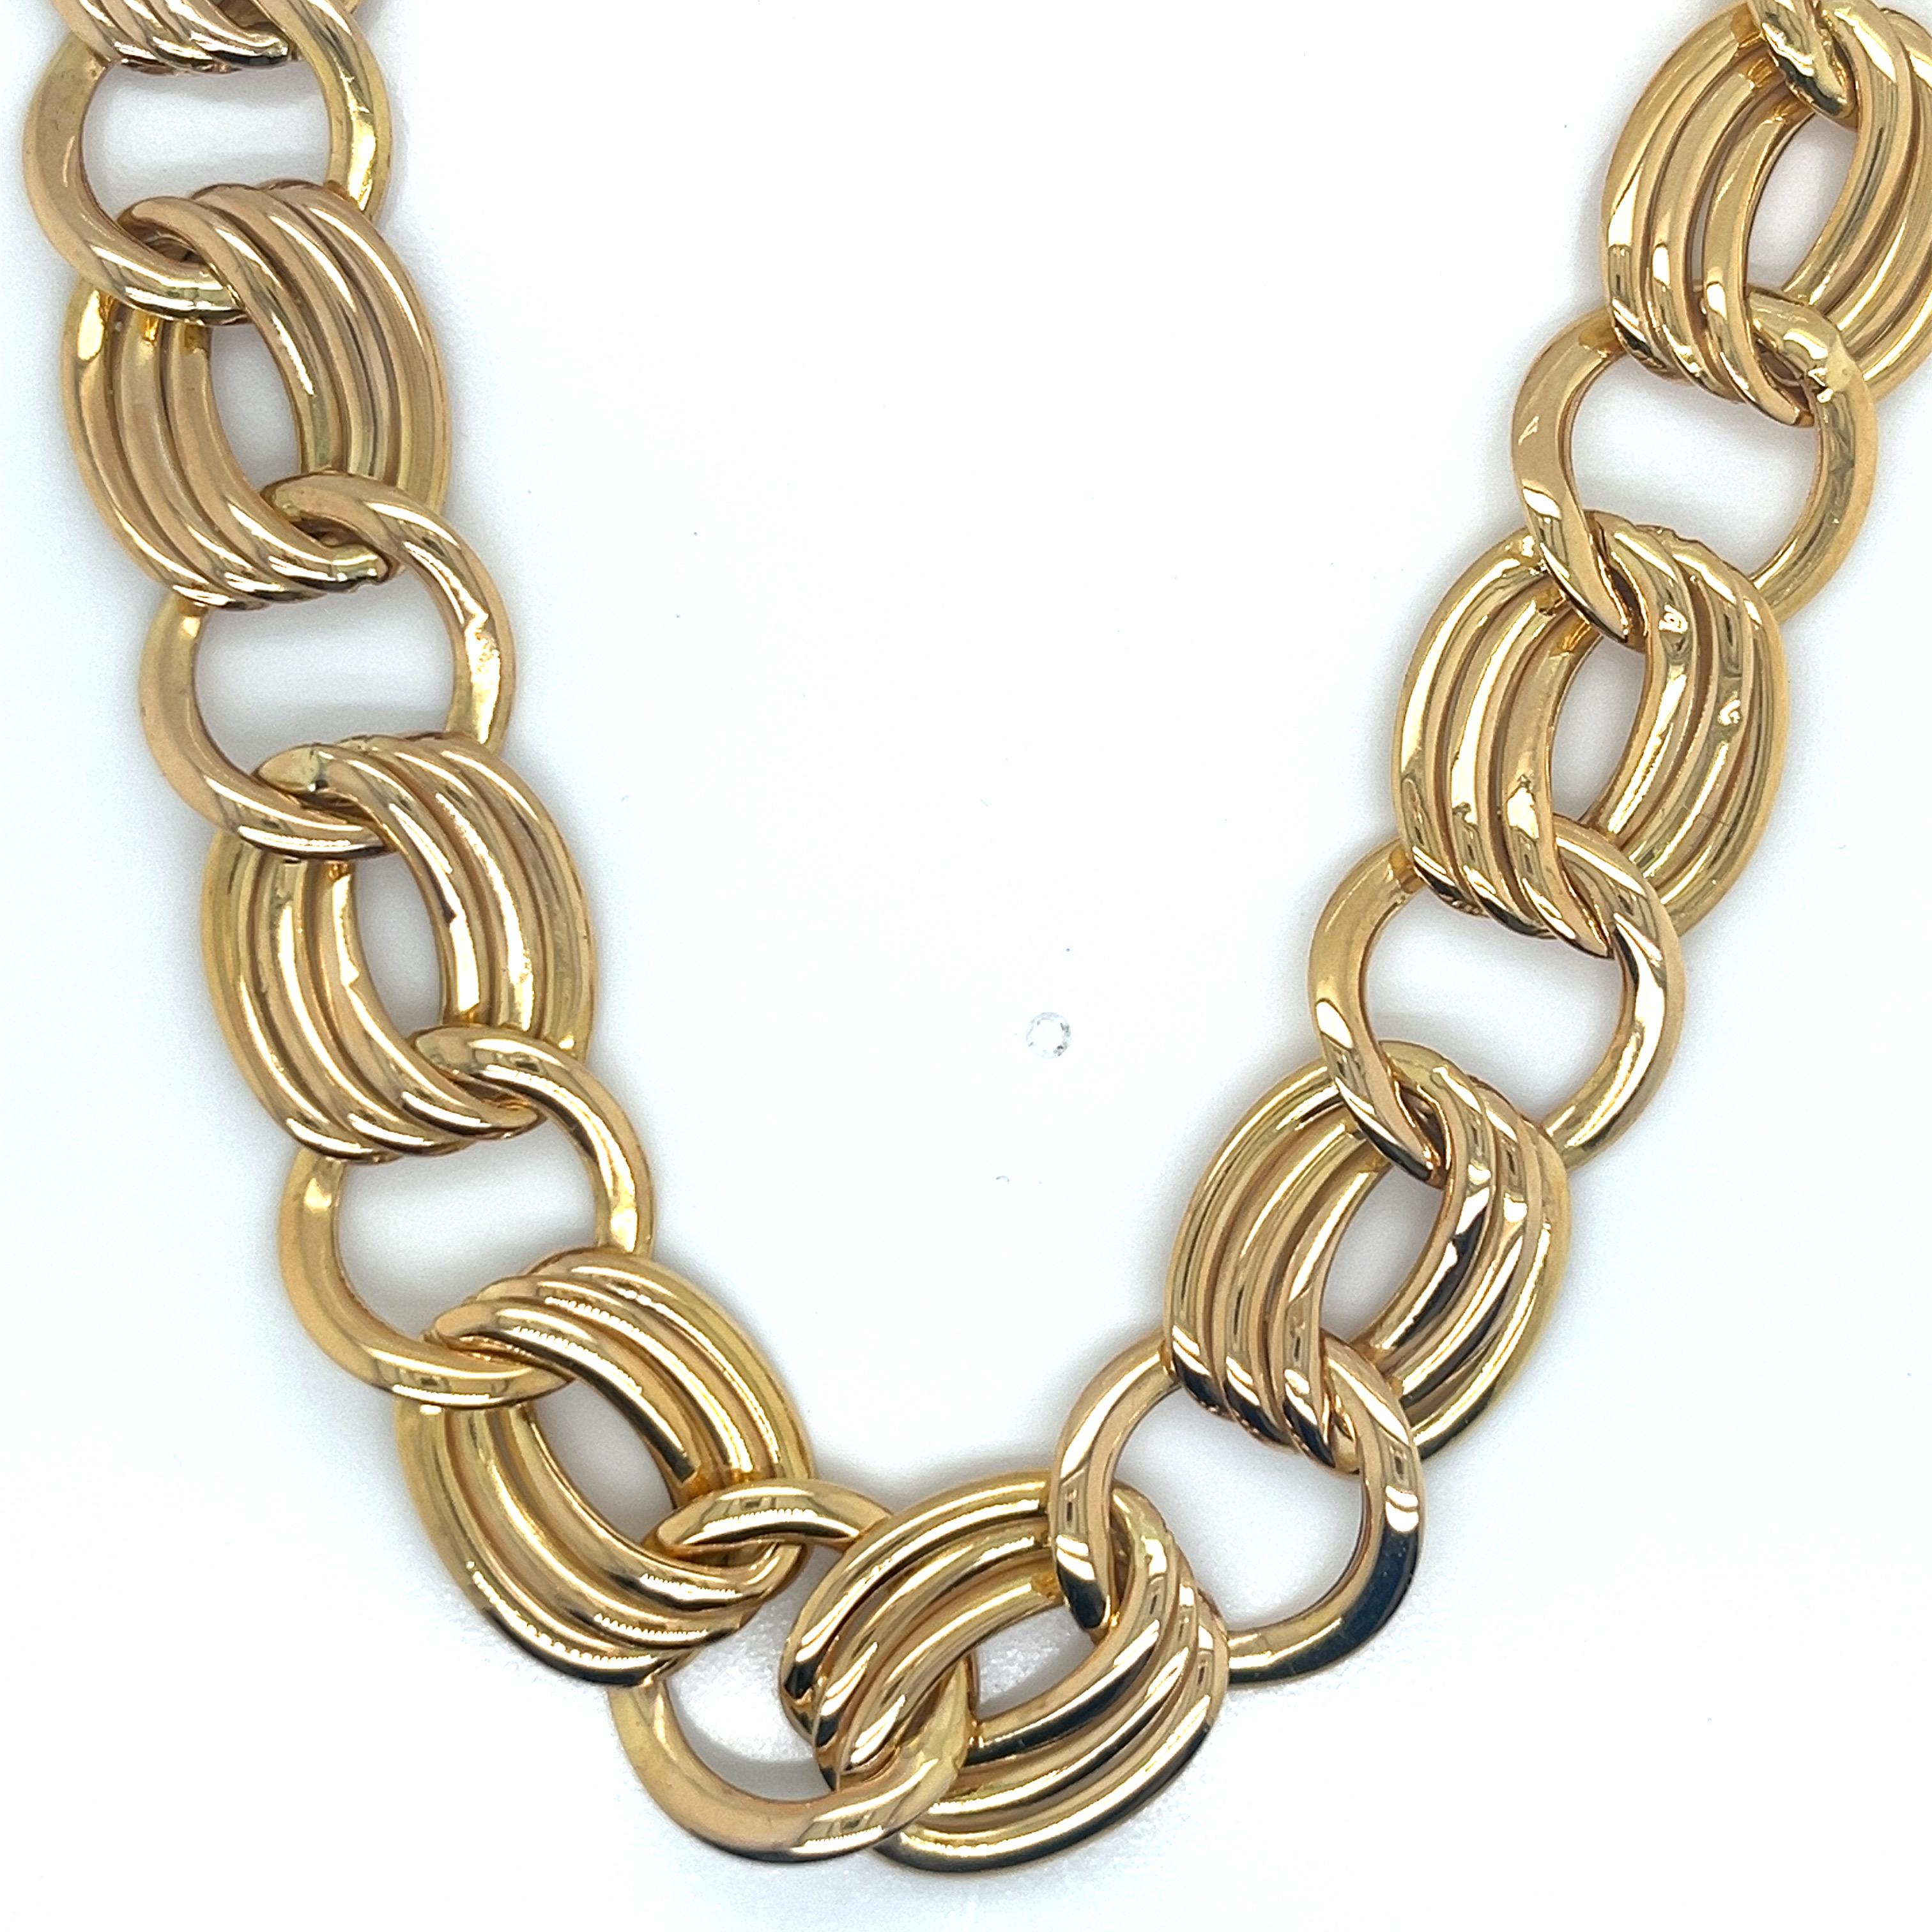 This striking necklace is a true testament to Italian craftsmanship from the 1990s. Expertly crafted in luxurious 14k yellow gold, it showcases a bold and eye-catching open link cable design. The substantial weight of 39.10 grams gives it a